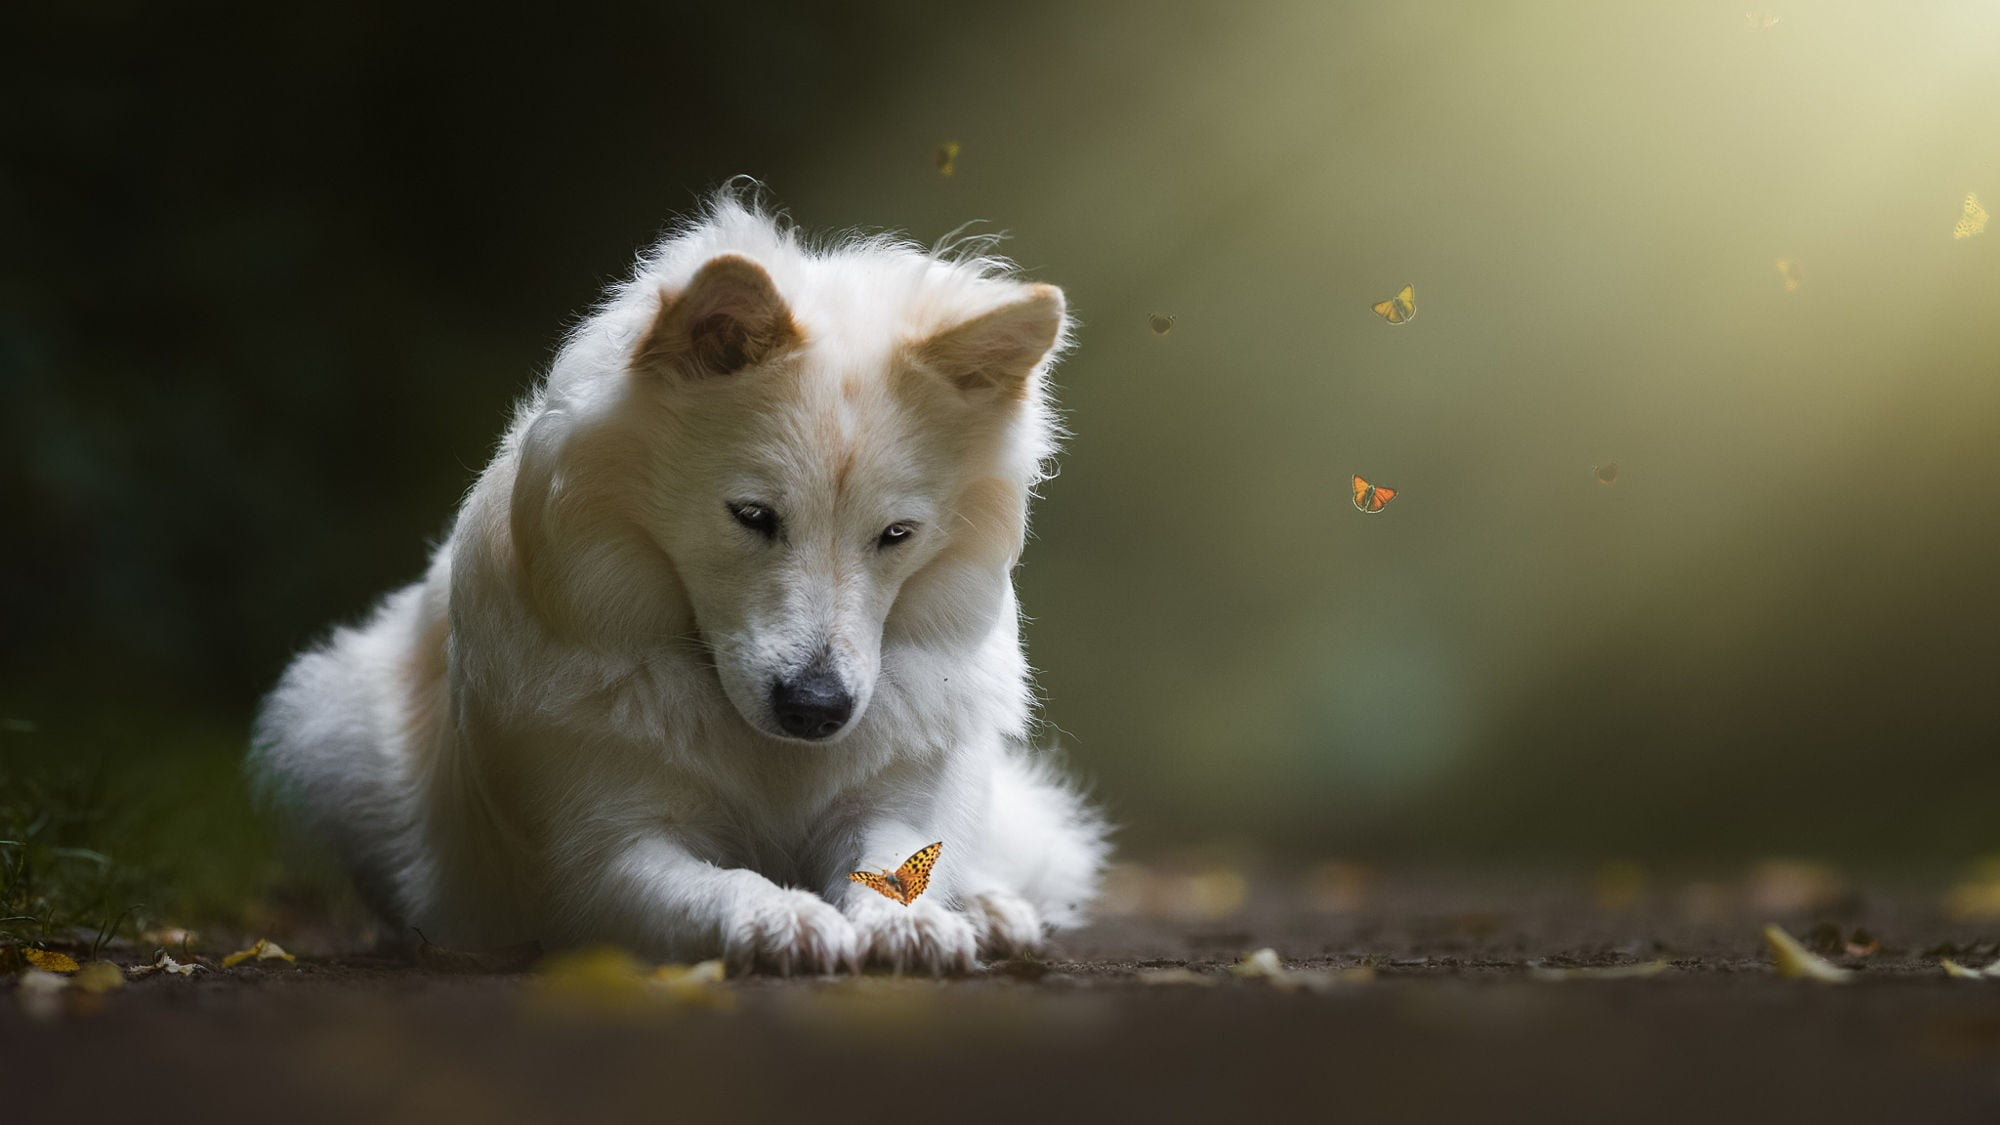 White wolf, dog, butterfly, one animal, animal themes, mammal wallpaper